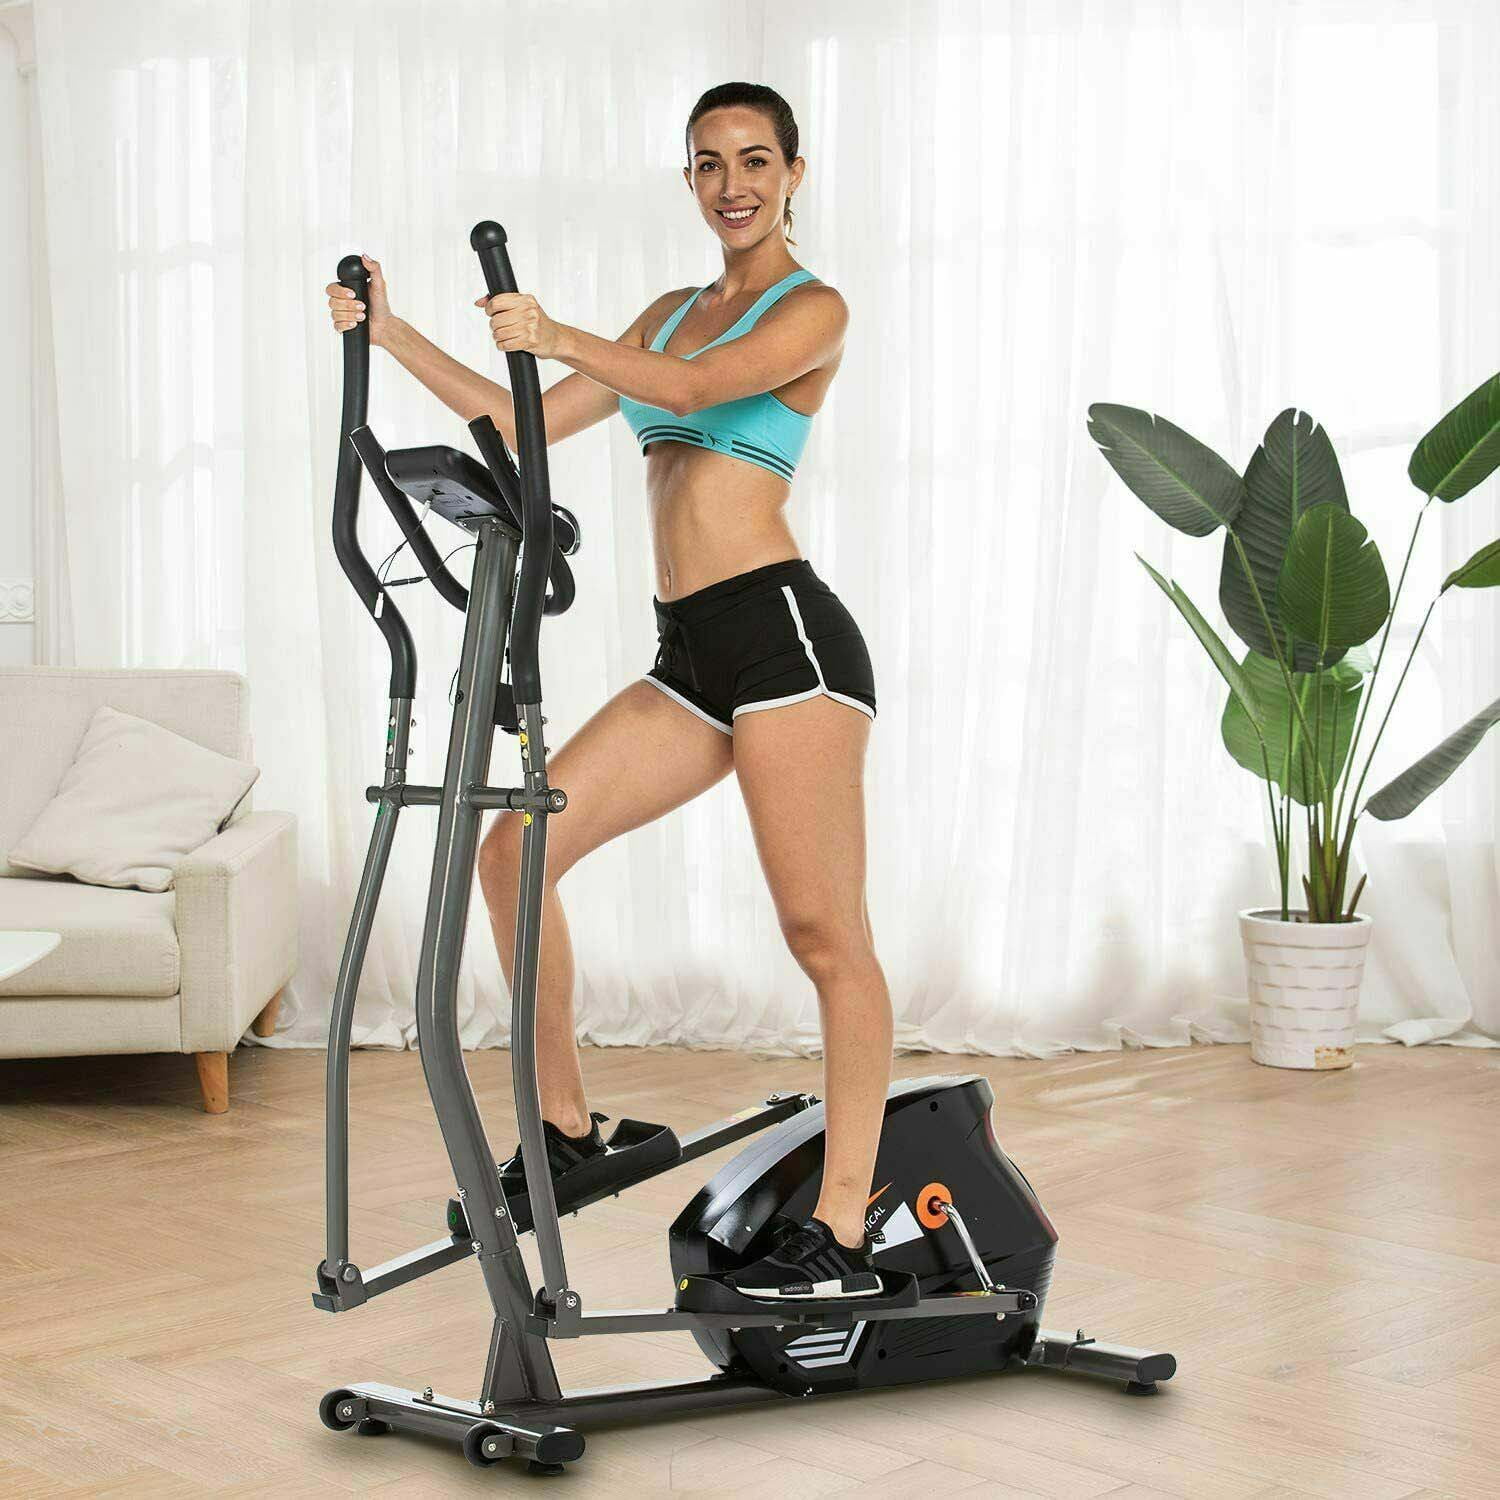 Fitness Eliptical Exercise Machines with 13 Workout Programs Programmable Monitor and Pulse Rate Grips 16 Levels Resistance FUNMILY E970 Electric Elliptical Trainers 390 LB Max Weight 